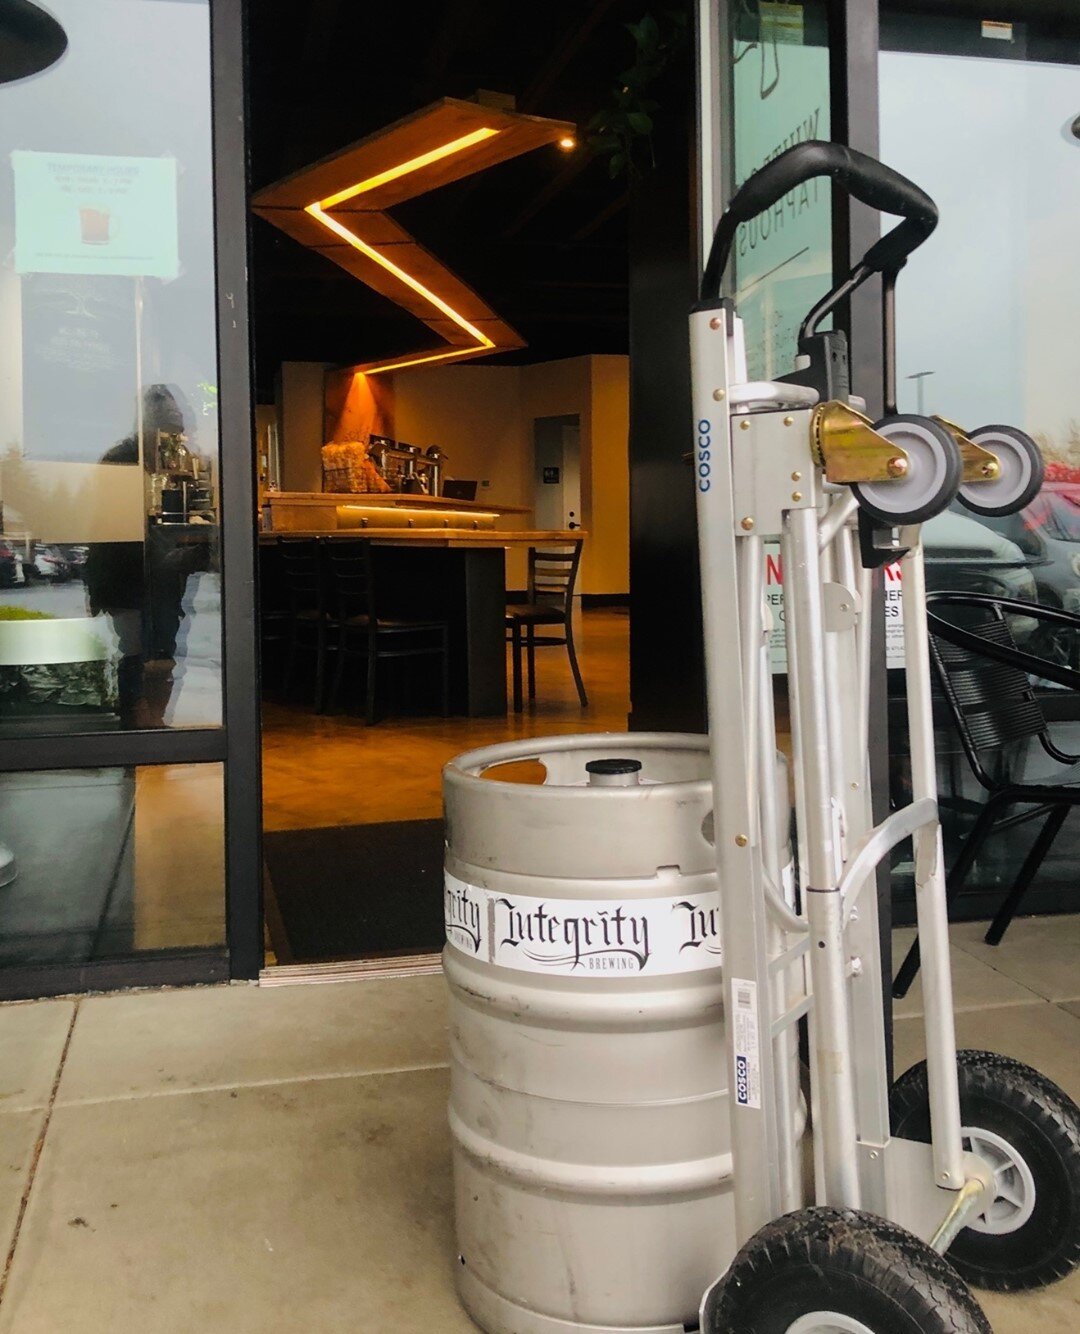 R2DIPA is on the move.  Be sure to stop by @whiteoaktaphouse on your next beer run. Grab a growler of our double raspberry IPA. Your tastebuds will be happy.